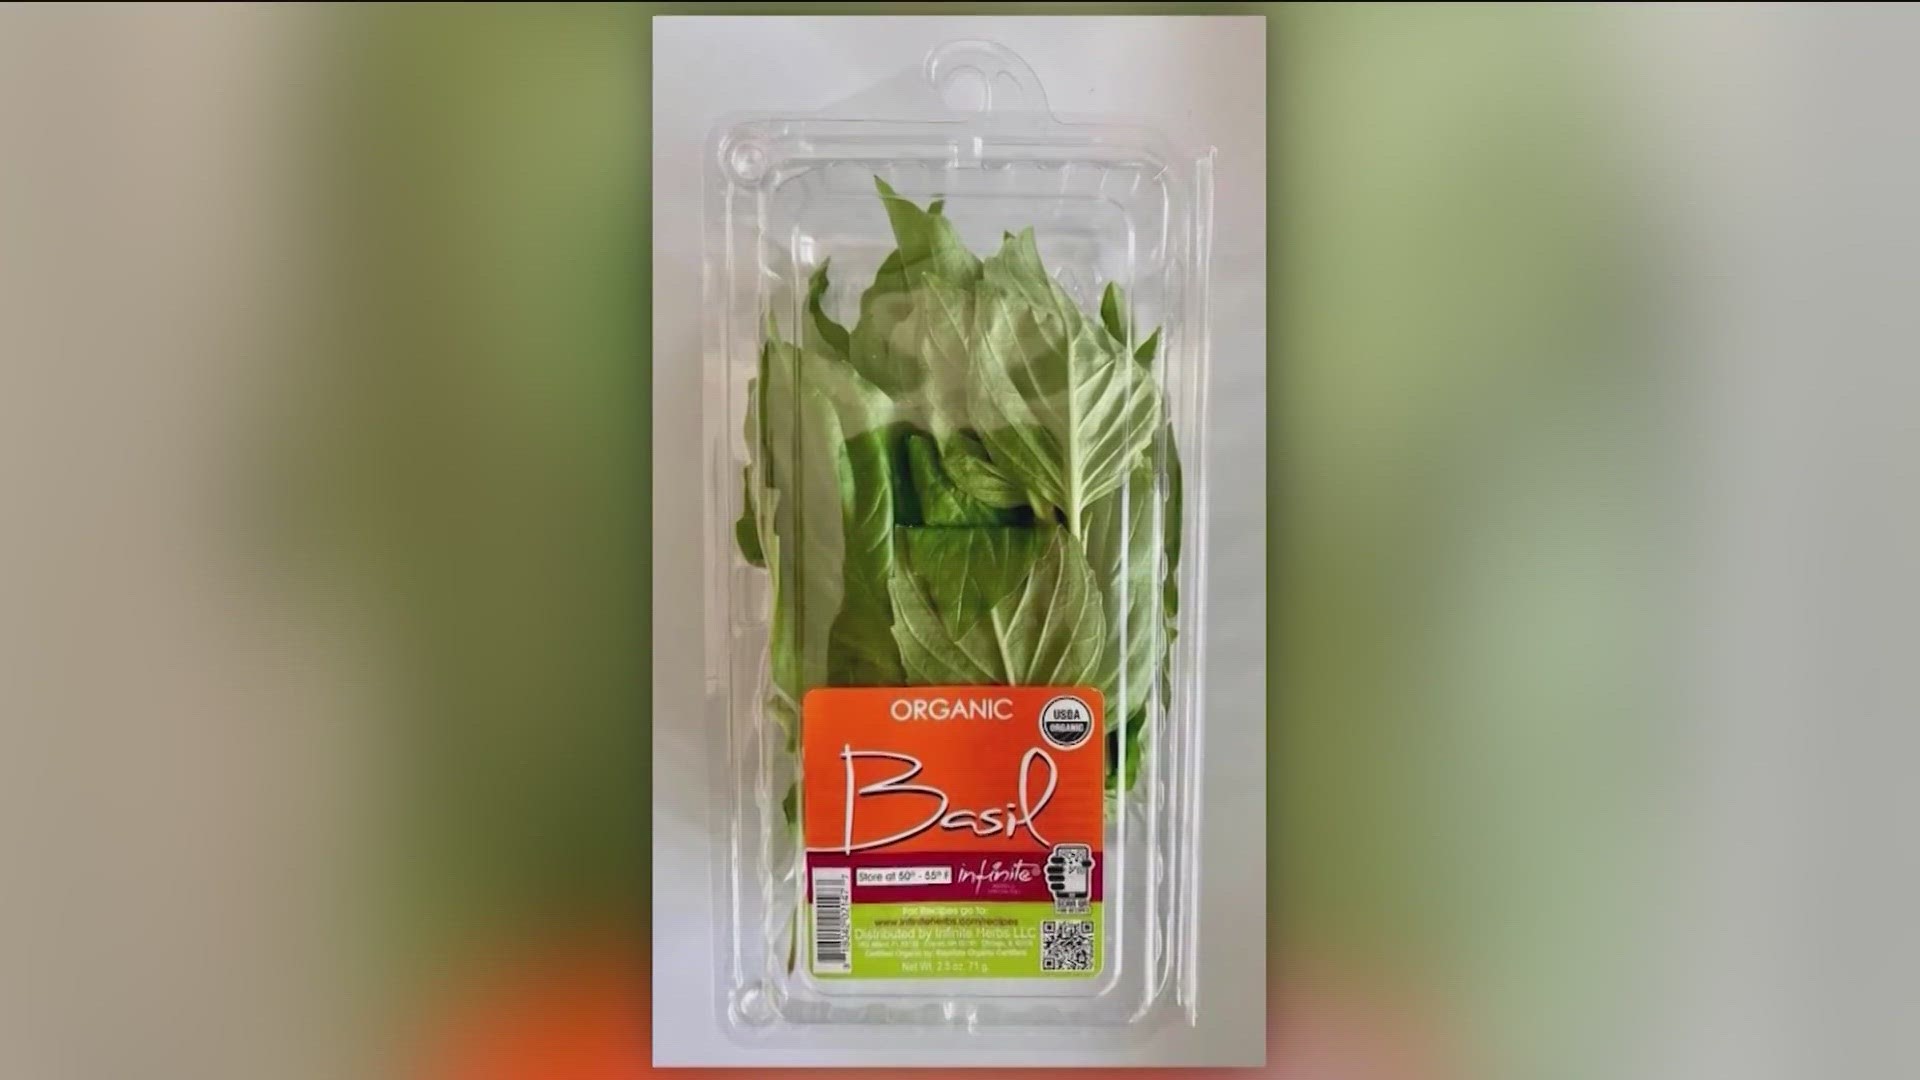 The CDC says at least 12 illnesses can be directly linked to the basil.